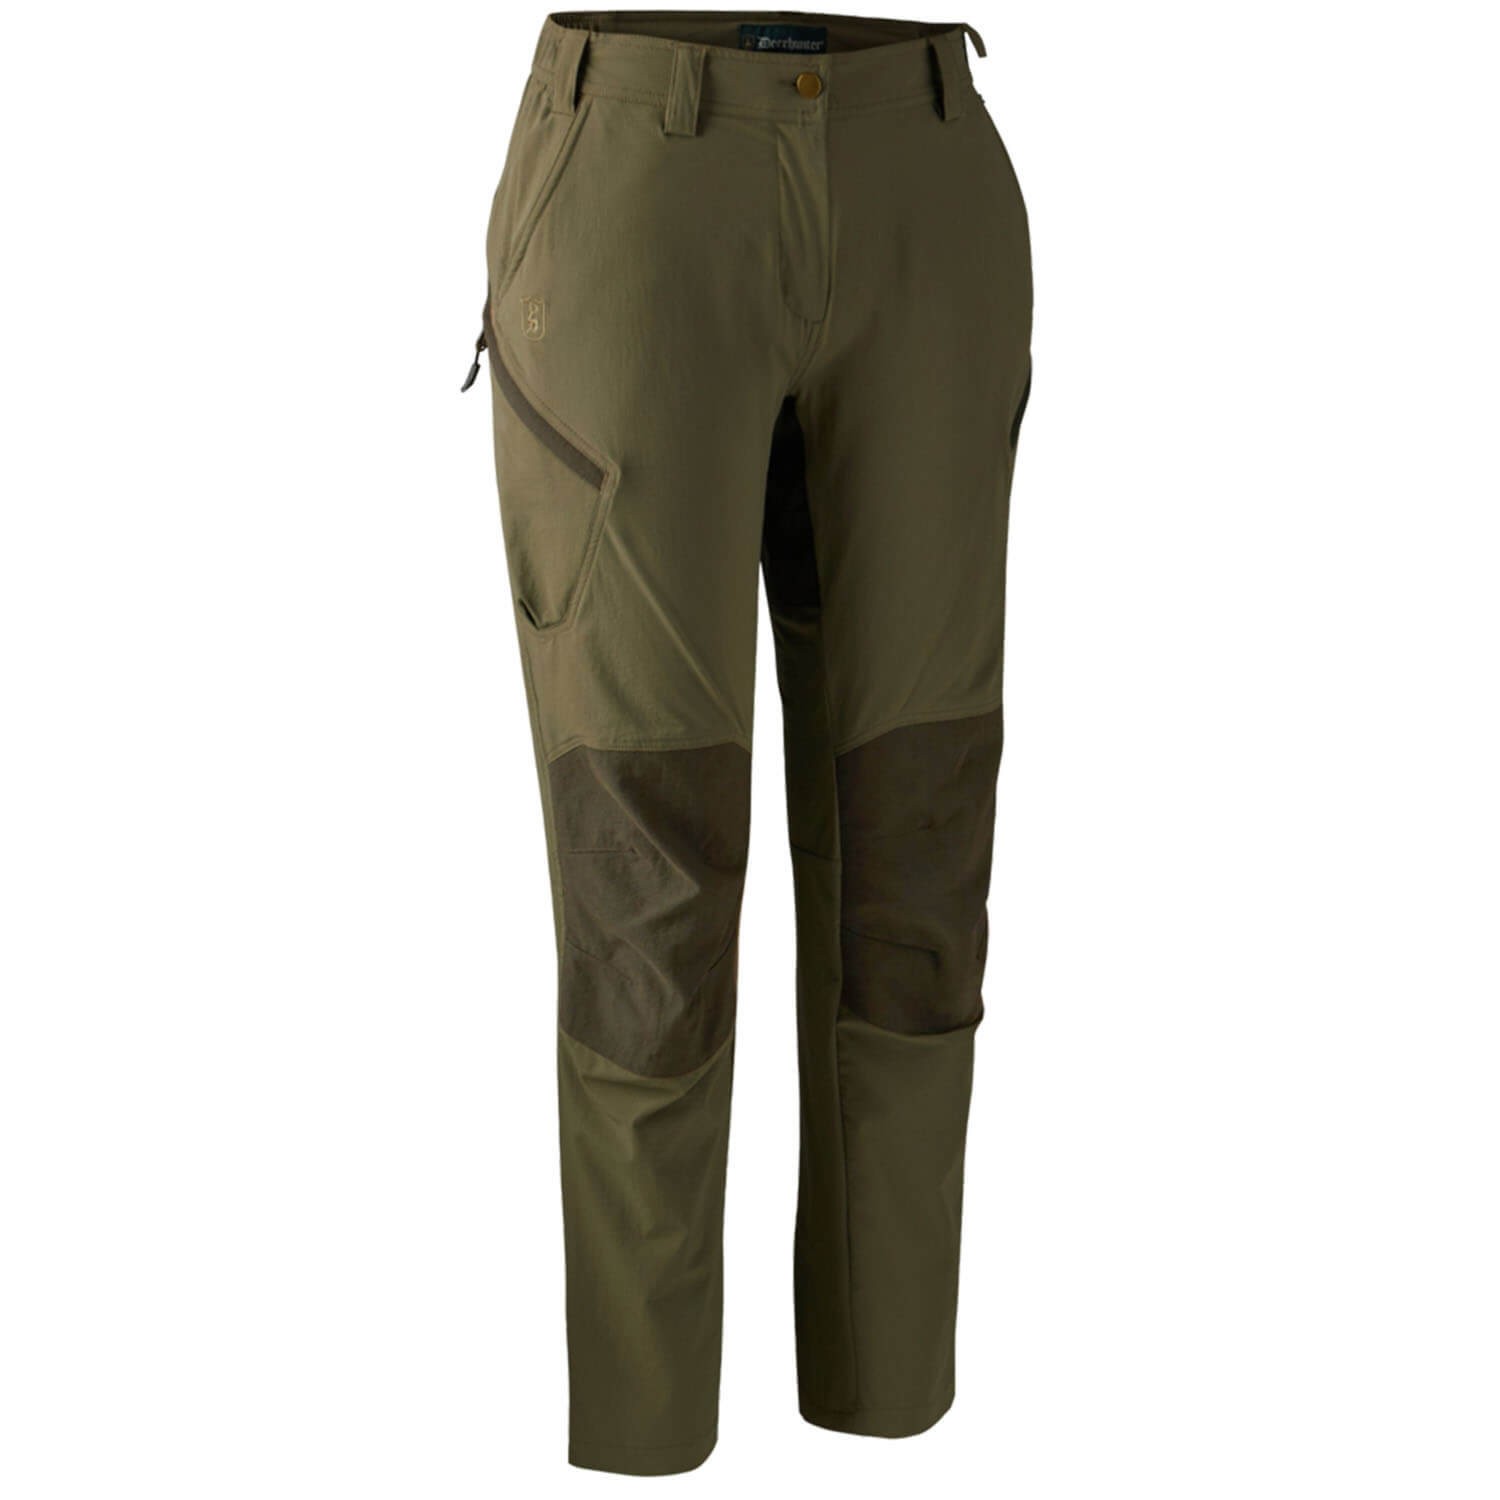 Deerhunter Jagdhose Lady Anti-Insect - Outlet